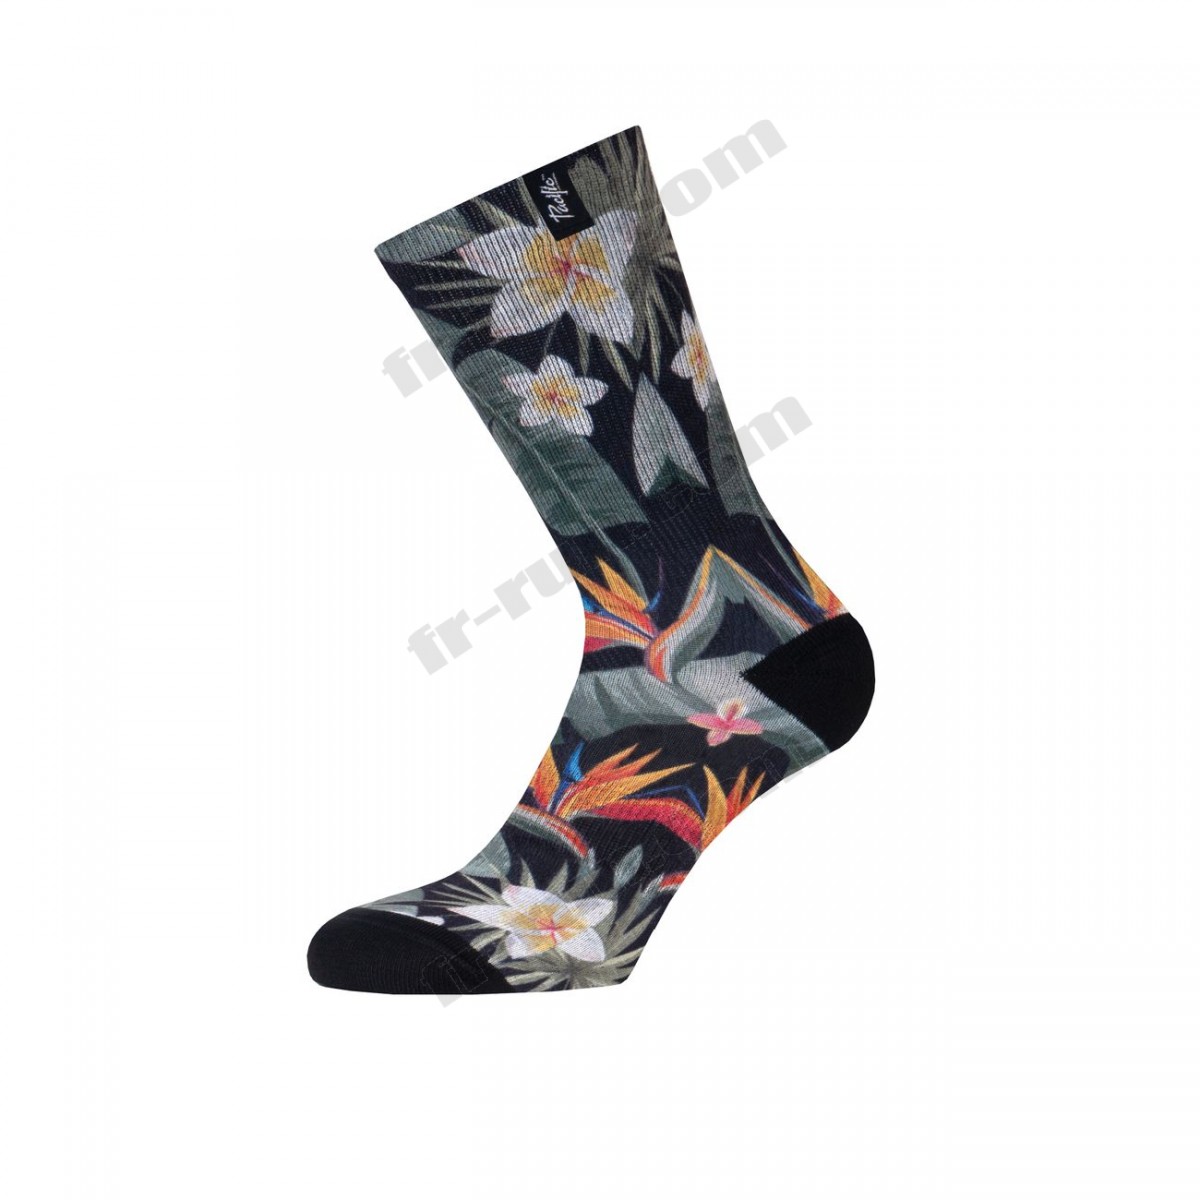 Pacific And Co/running adulte PACIFIC and CO MALAY Unisex Performance Socks ◇◇◇ Pas Cher Du Tout - Pacific And Co/running adulte PACIFIC and CO MALAY Unisex Performance Socks ◇◇◇ Pas Cher Du Tout